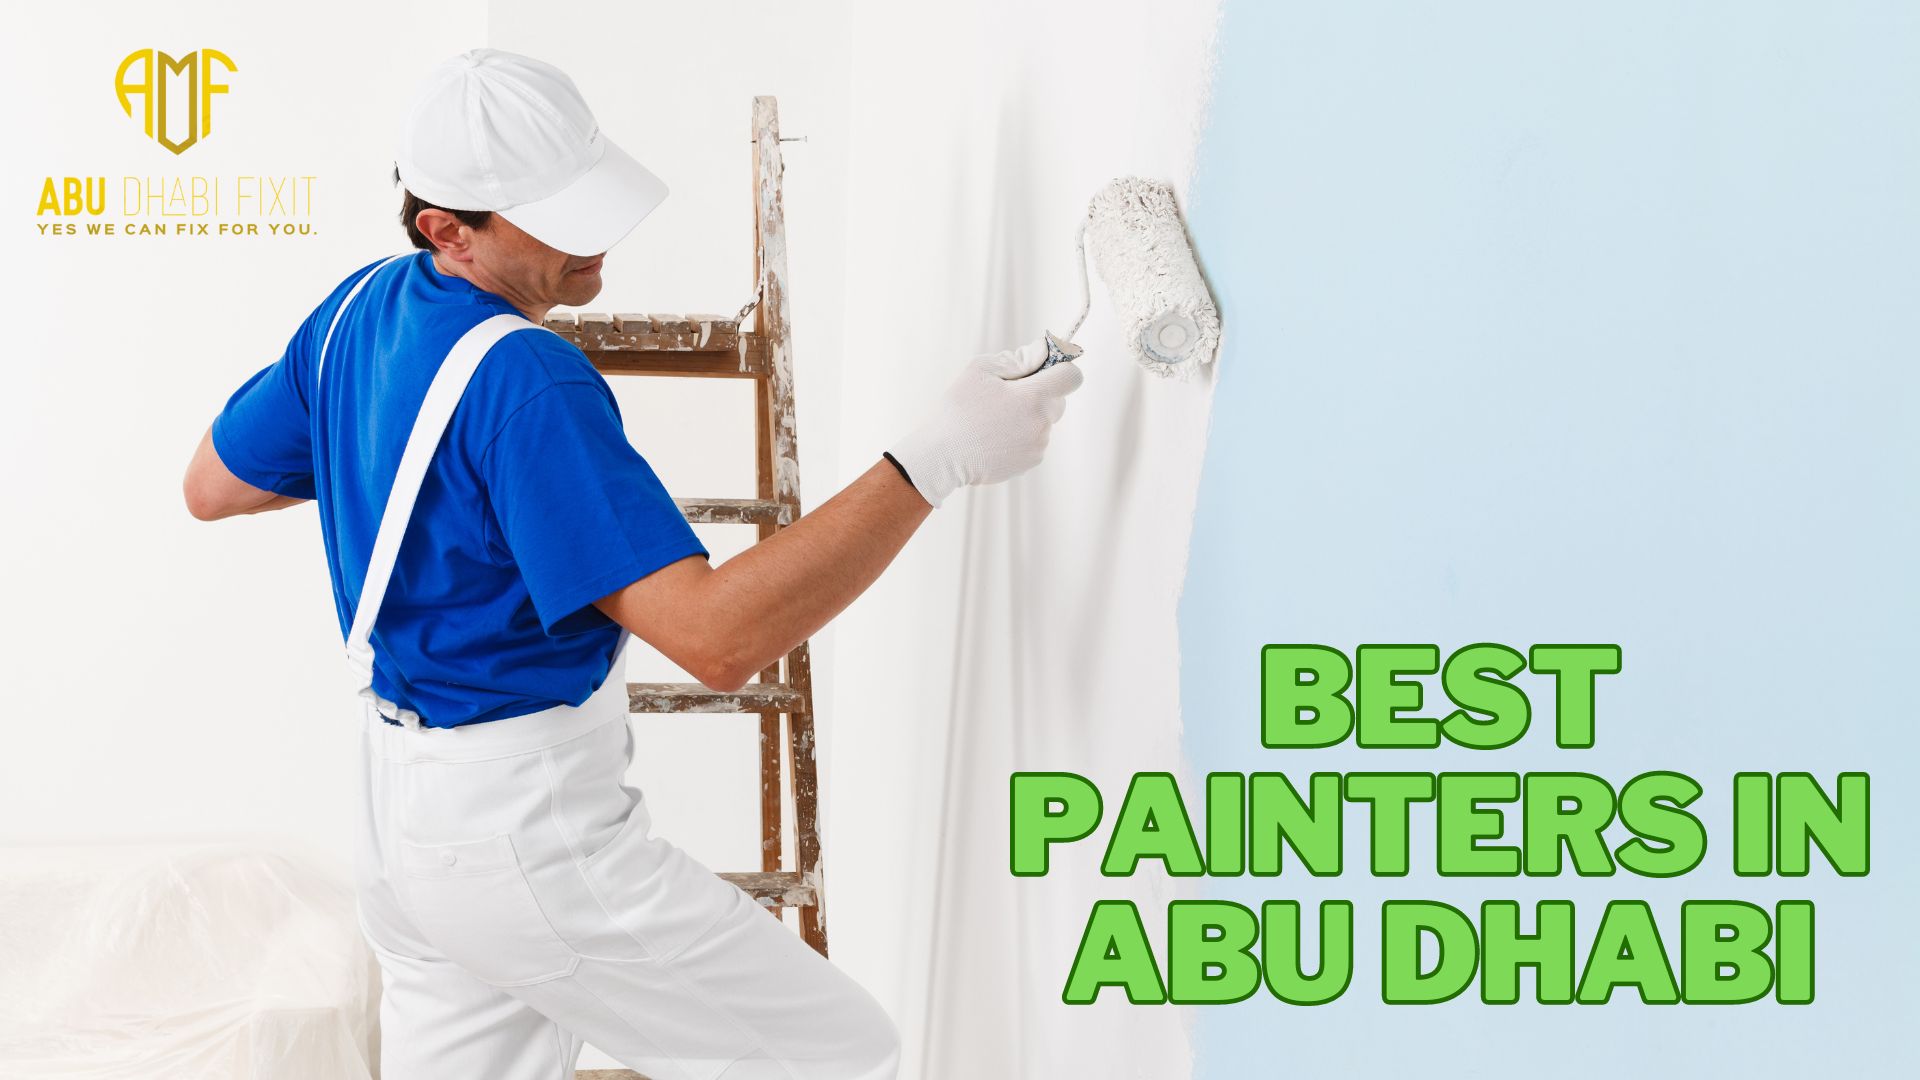 Painting Services in Abu Dhabi